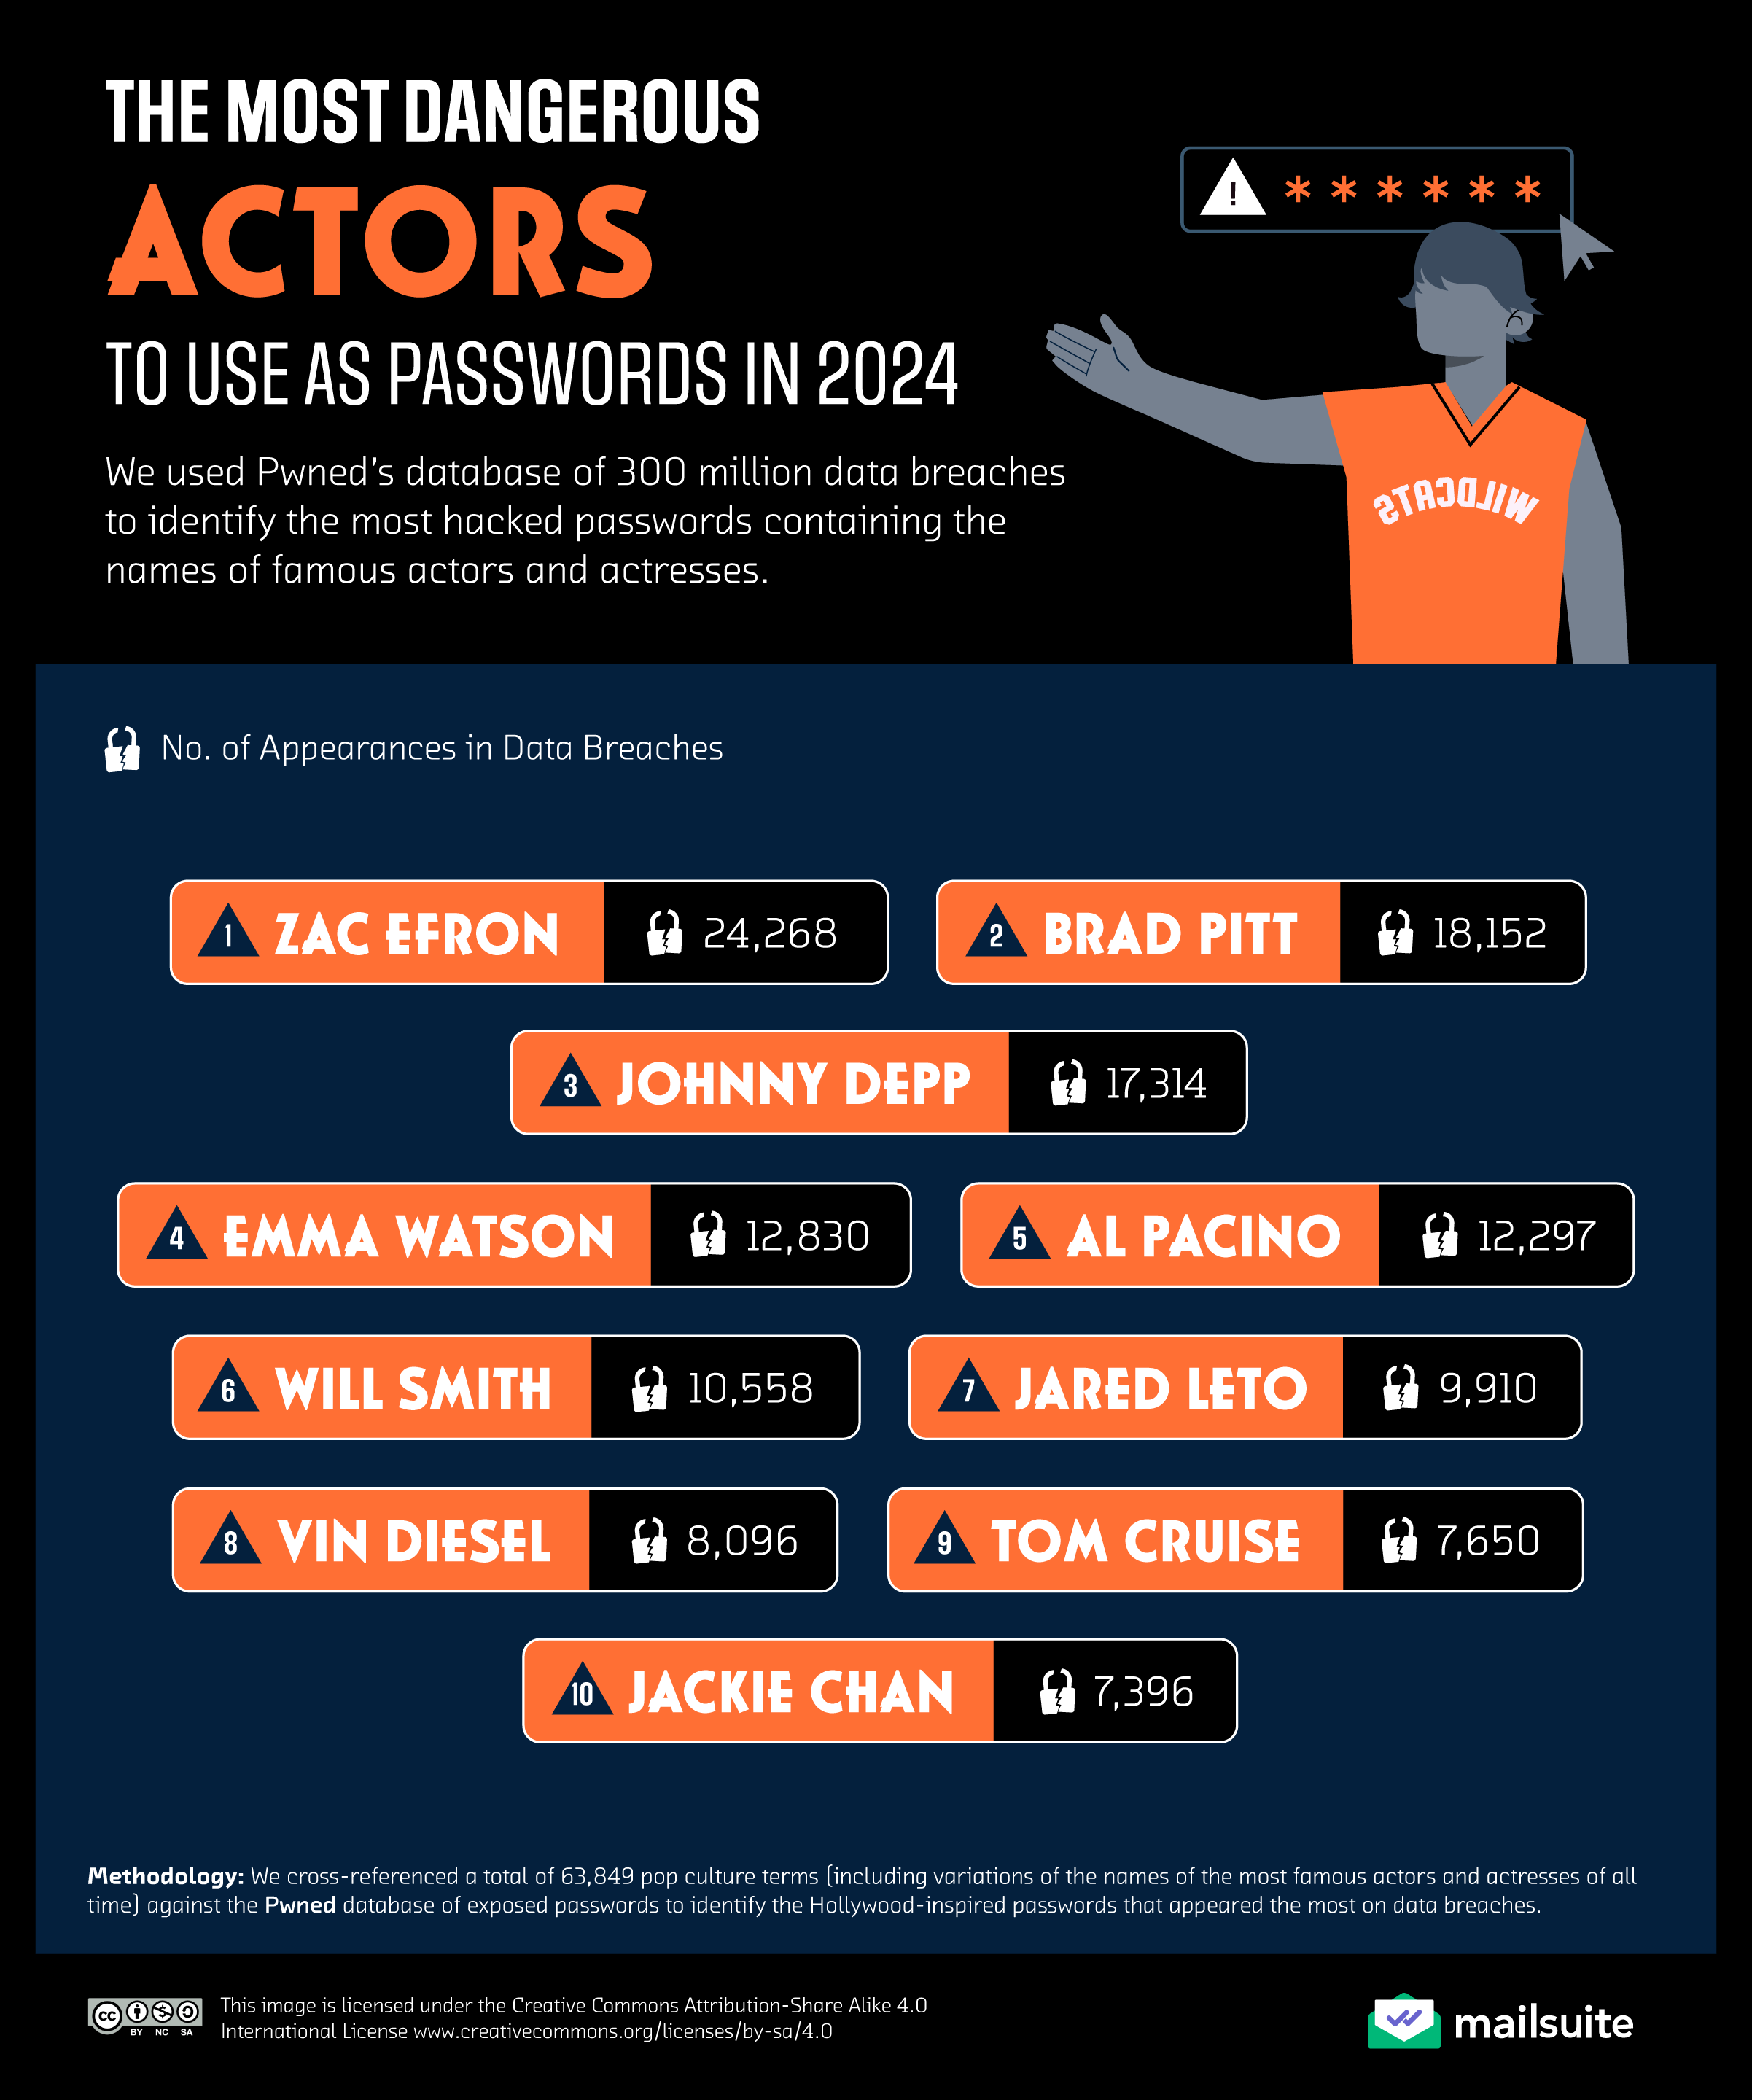 The Most Dangerous Actors to Use As Passwords in 2024